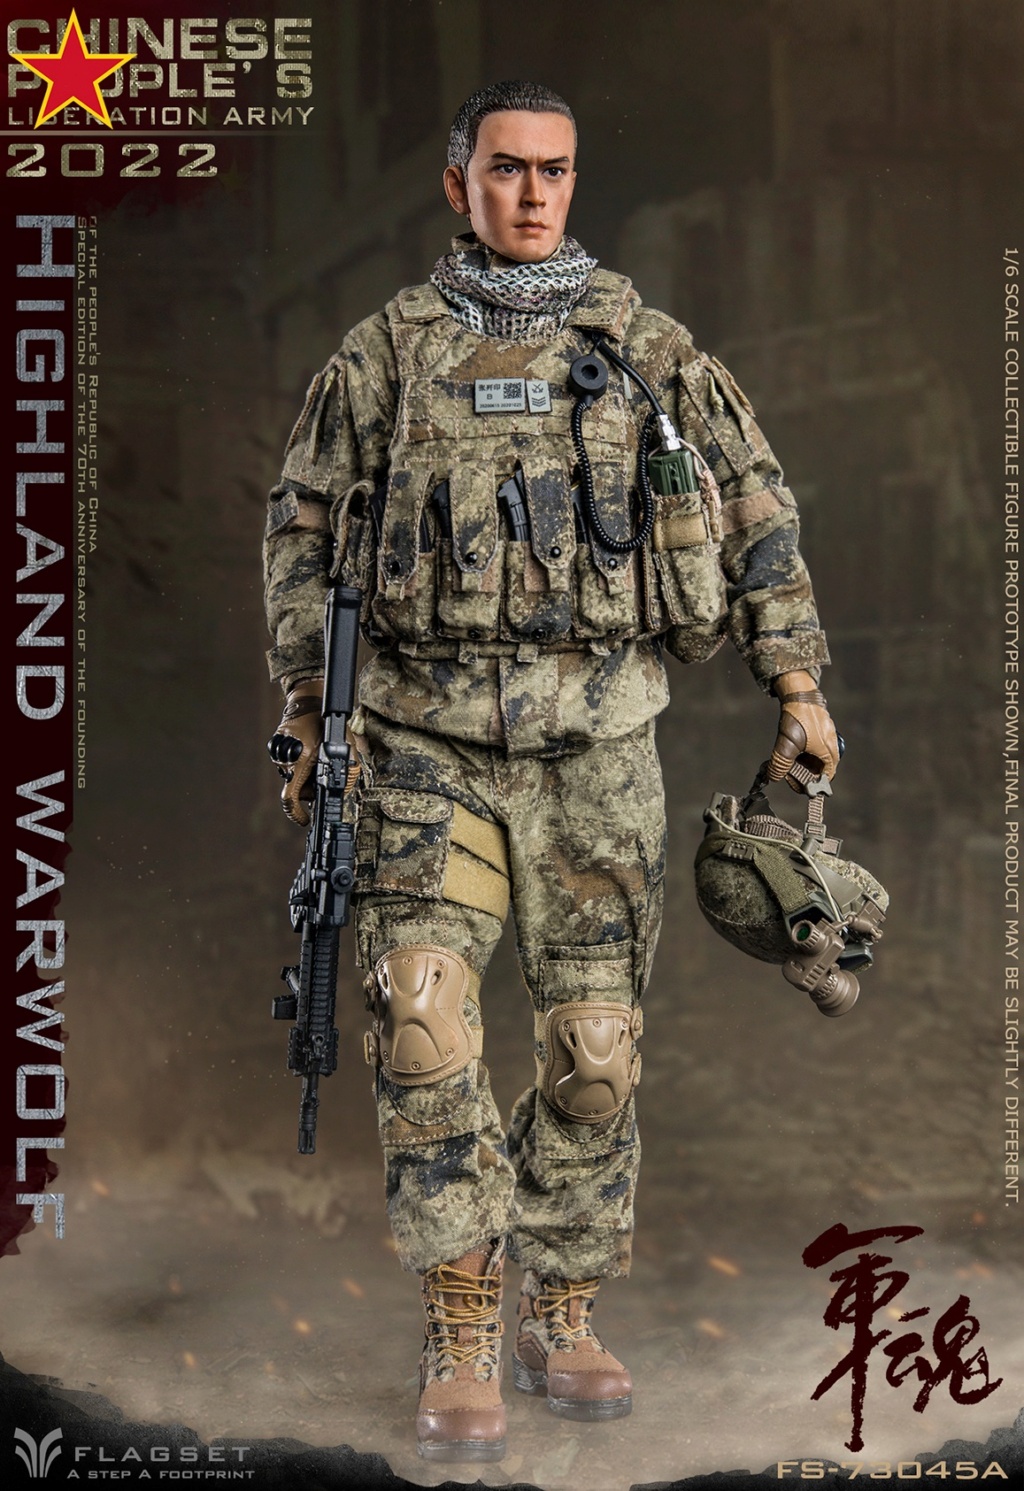 HighlandWarwolf - NEW PRODUCT: Flagset: 1/6 People's Chinese Liberation Army Series - Highland Warwolf /Sniper #FS-73045A/B 12545810